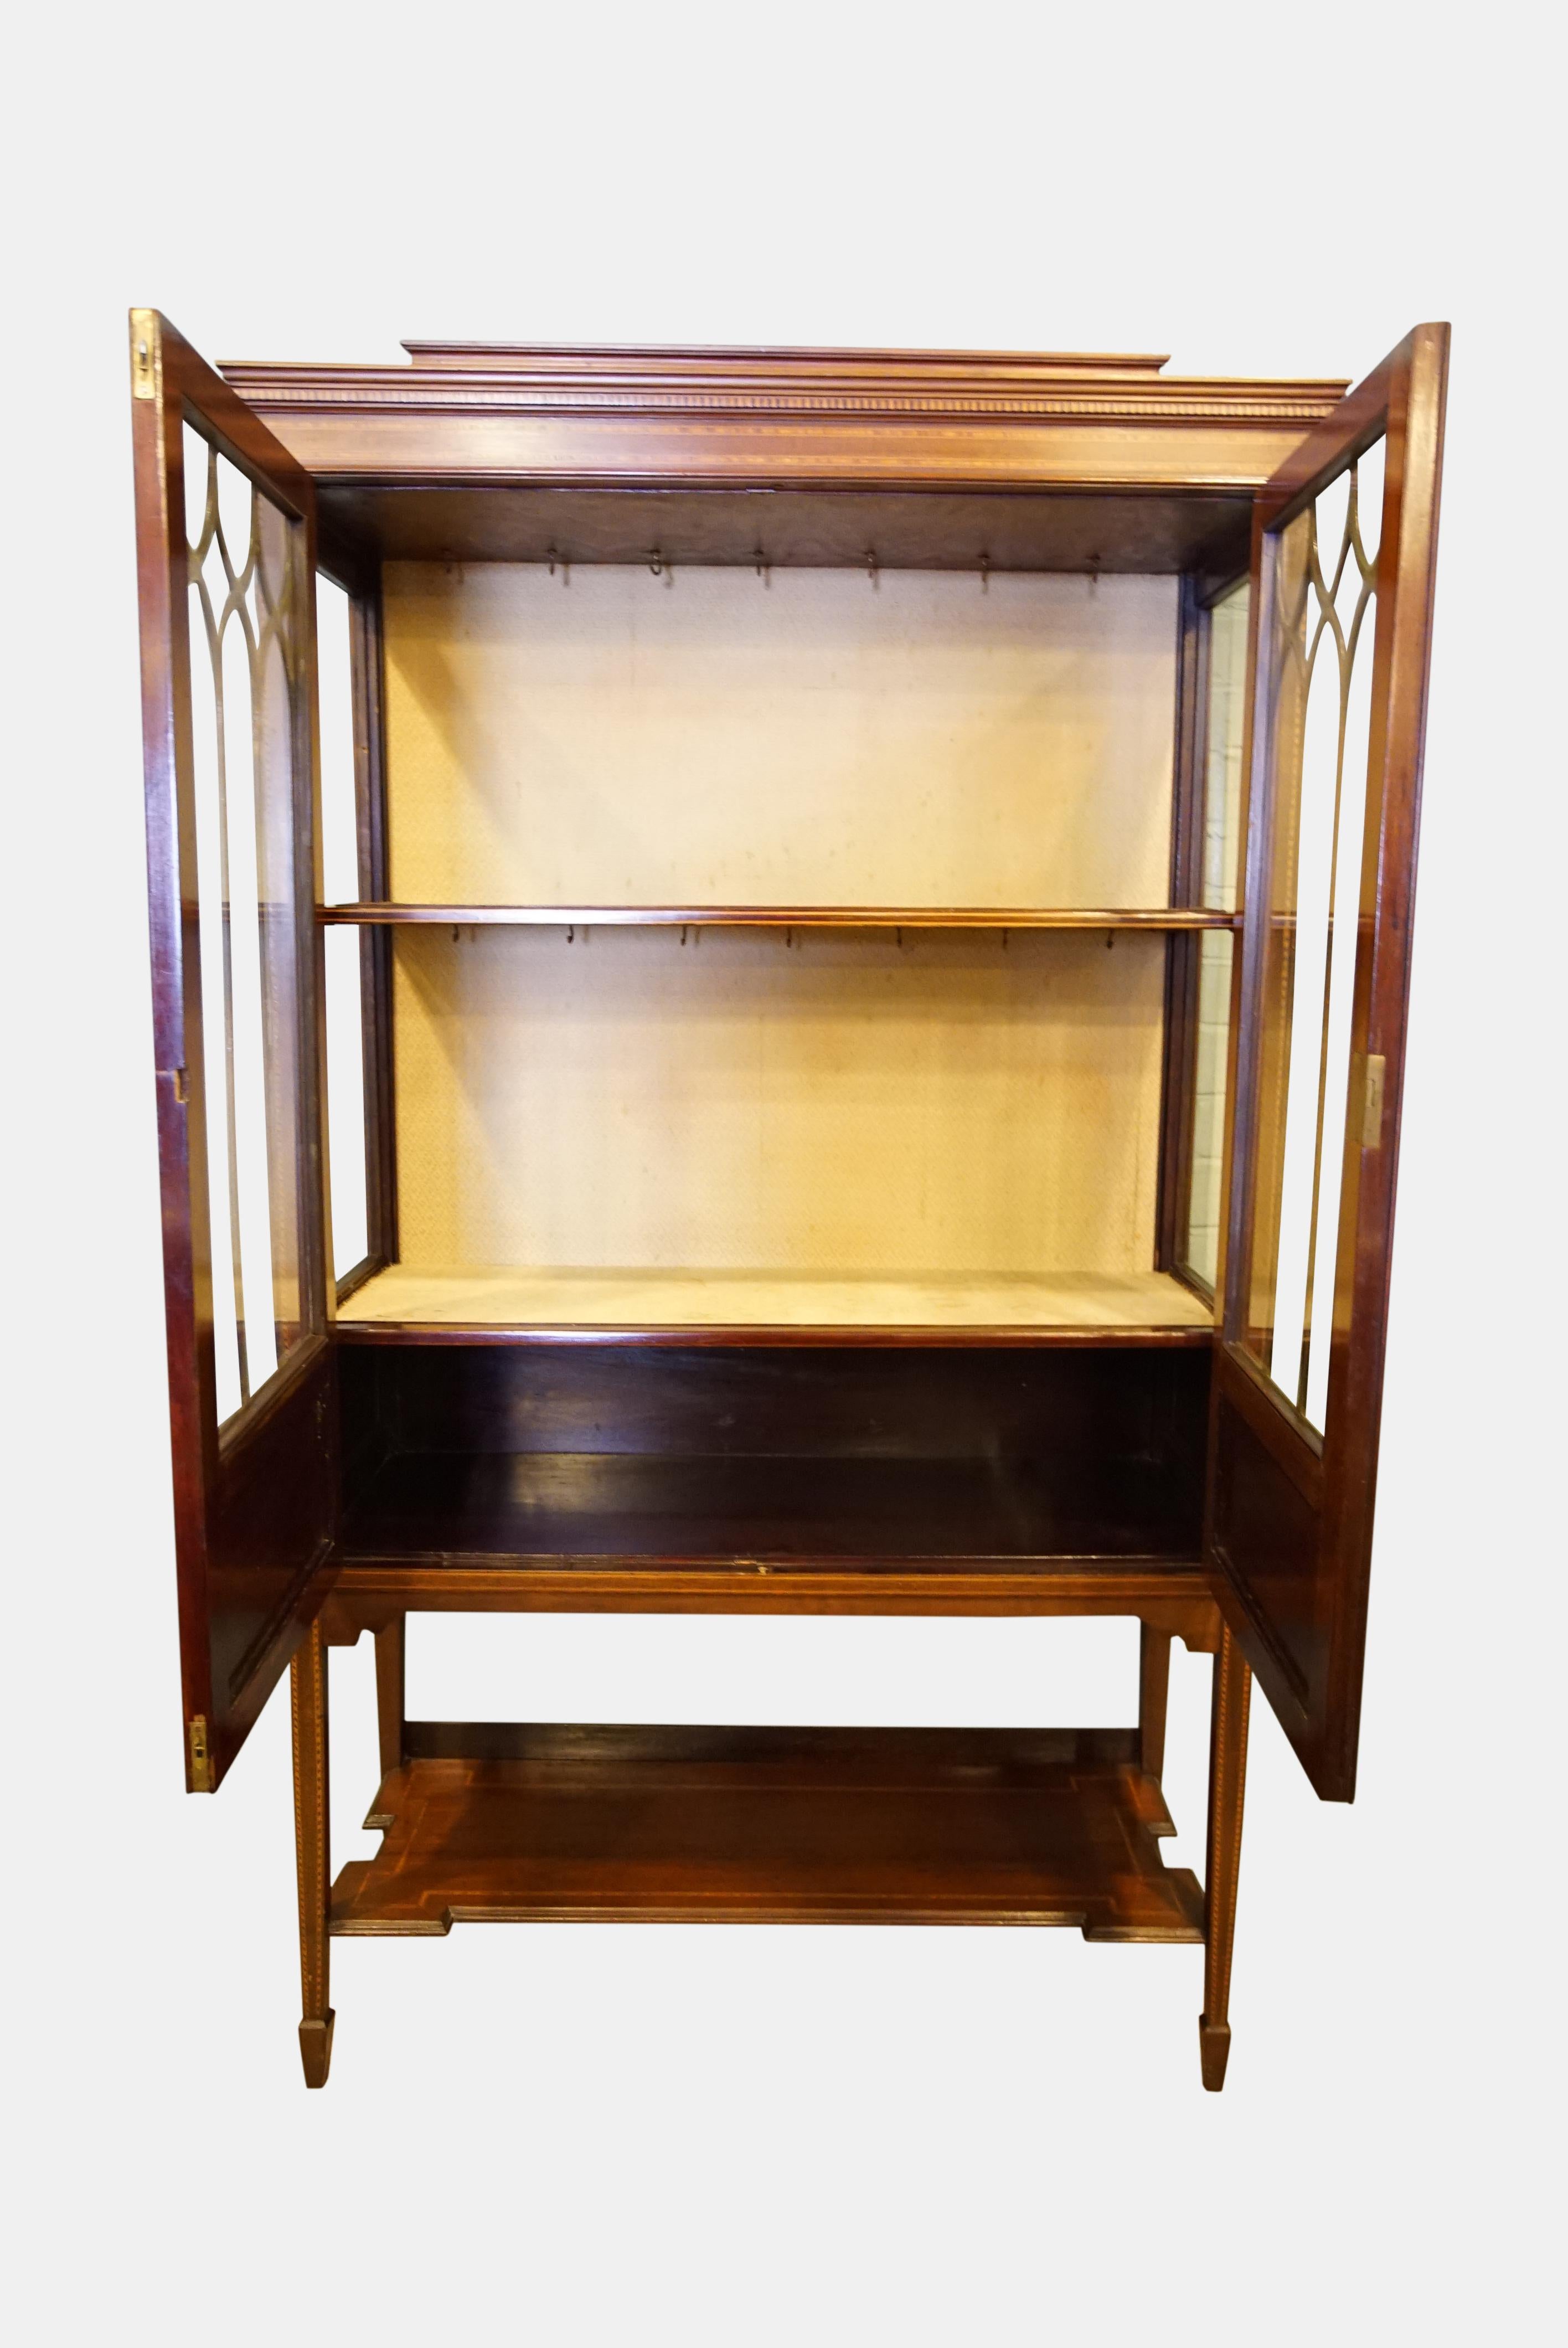 An Edwardian satinwood banded, inlaid display cabinet with two-doors on square tapering legs and spade feet,

circa 1900.